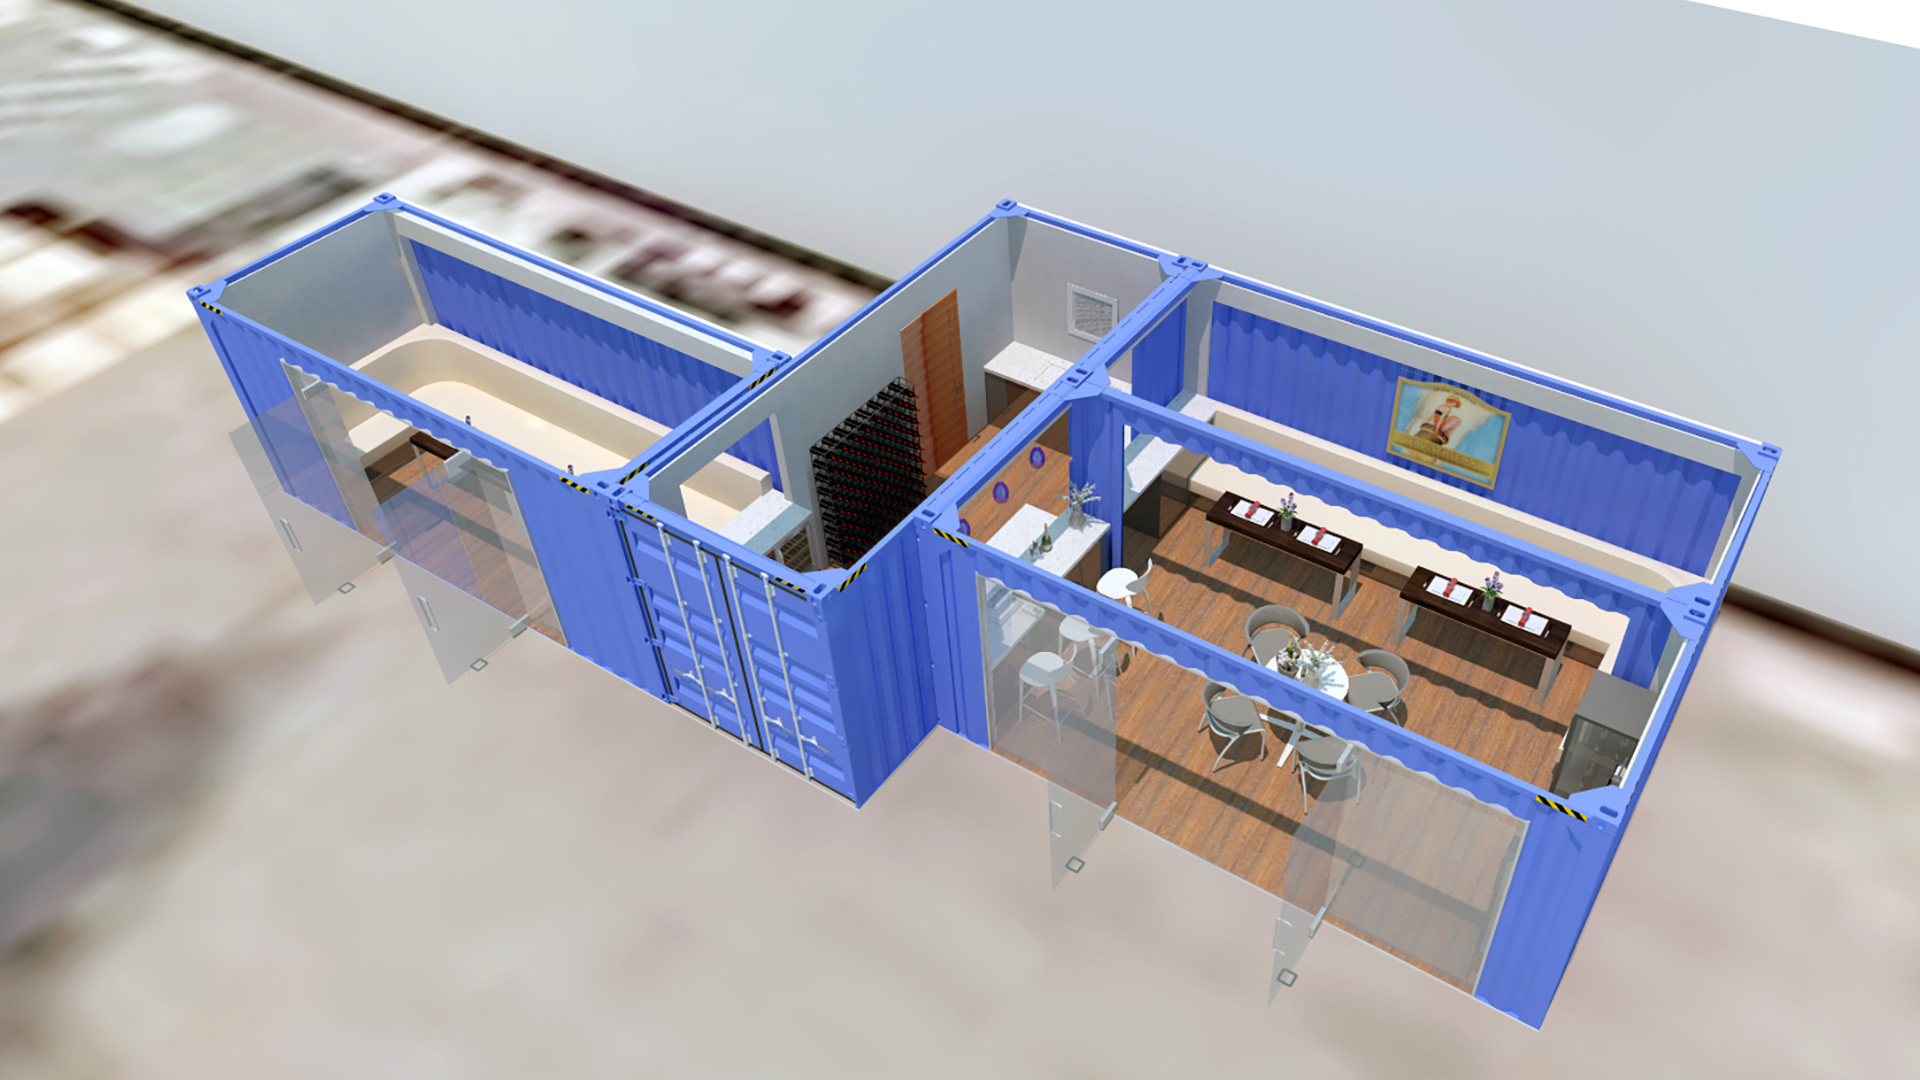 Rendering of shipping container tasting room layout, with various seating areas and serving counters, located within 3 connected containers.